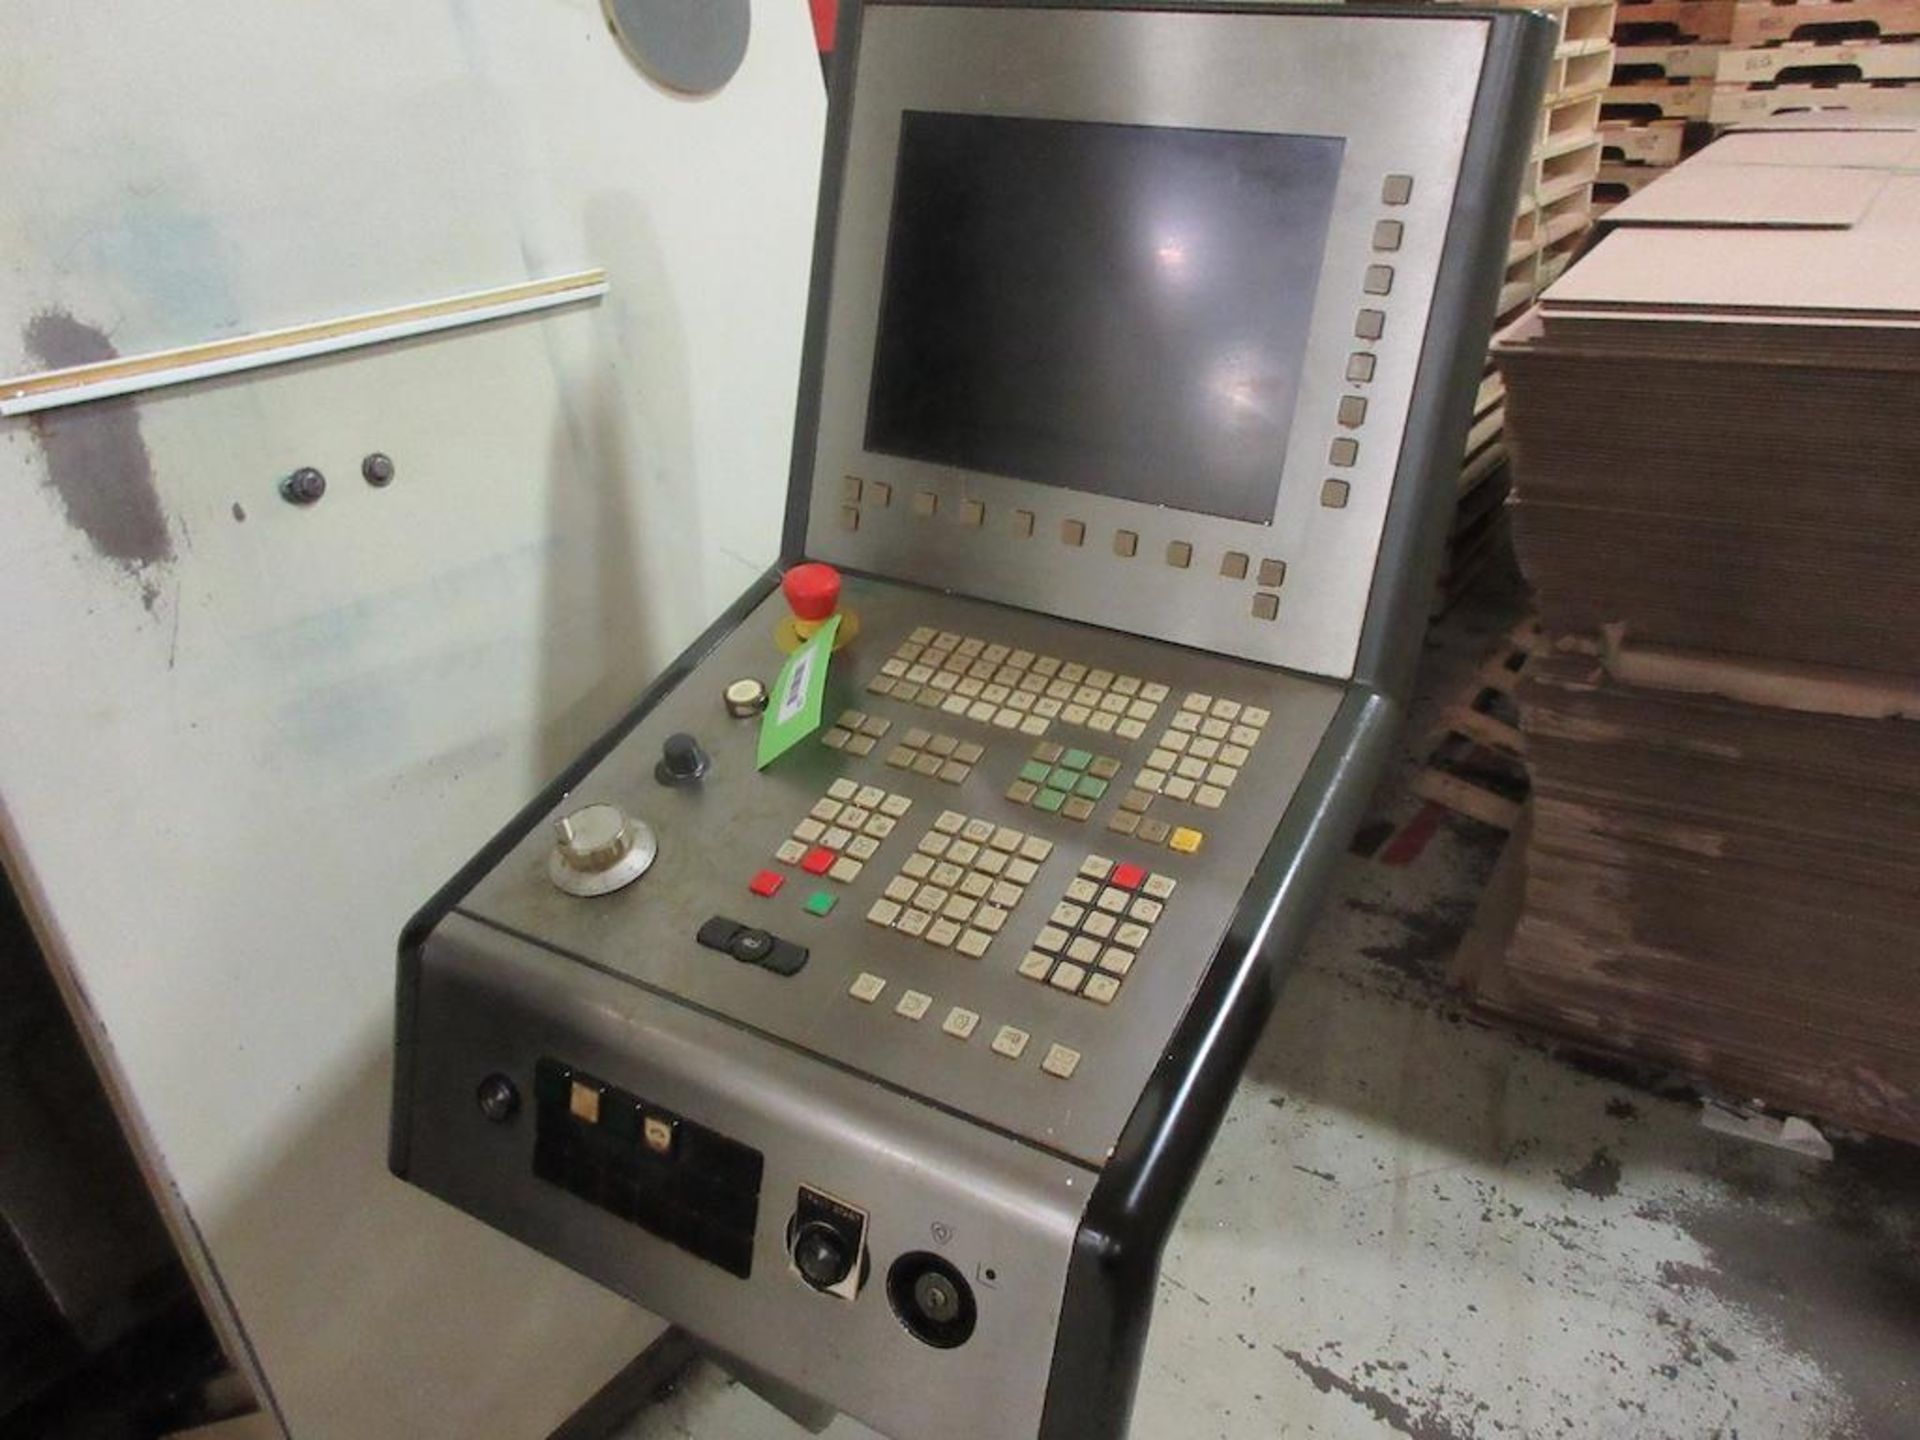 2004 DMG CNC Lathe, Model Twin 32, Twin Spindle, 4 Axis, CNC Control, Bar Material Diameter 32 mm, - Image 2 of 18